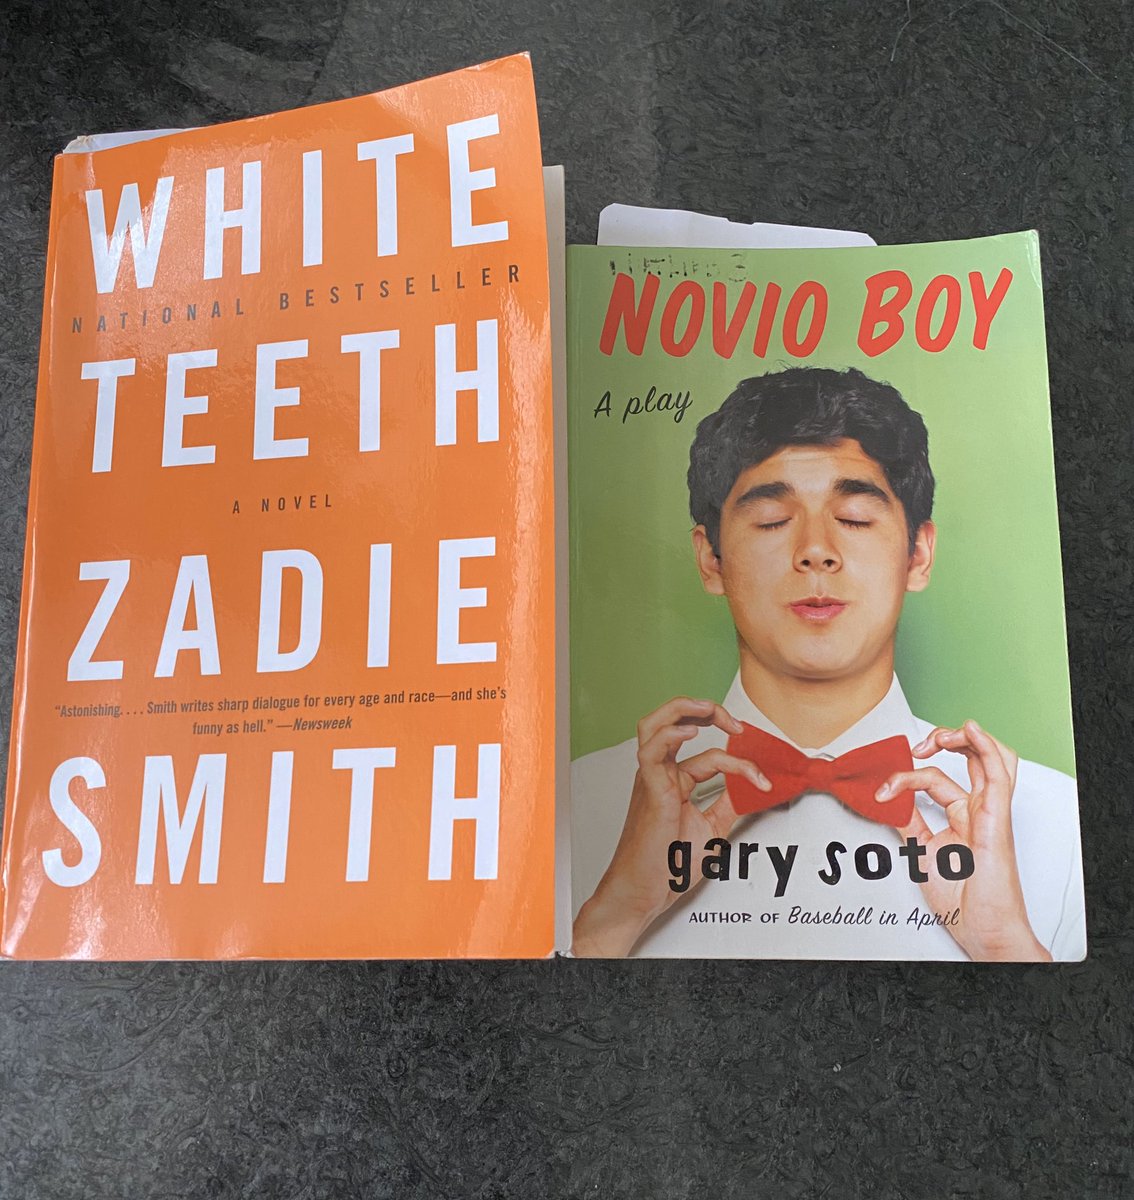 I like to read my books like I watch my shows. One light-hearted and entertaining and the other requires more investment and intellectual challenge. Novio Boy by Gary Soto and White Teeth by Zadie Smith are both great reads! #SpiritWeek #WhatYaReadingWednesday @IDEA_at_Fannin